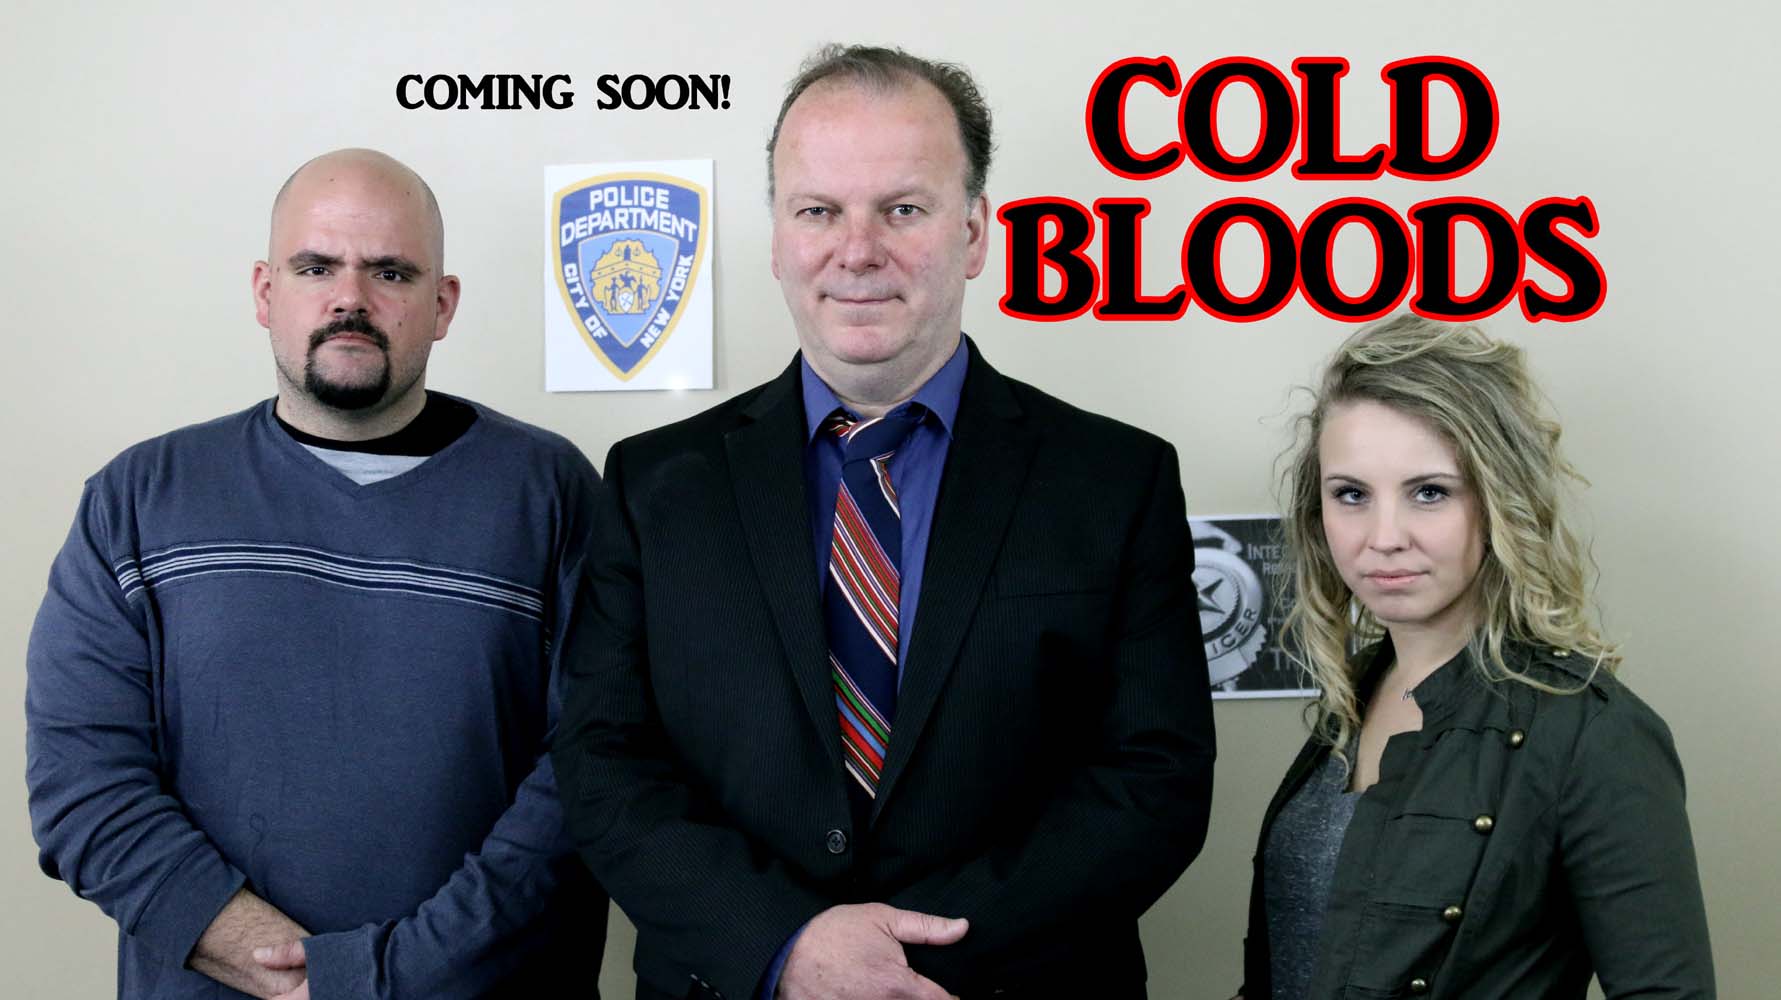 Cold Bloods Coming soon